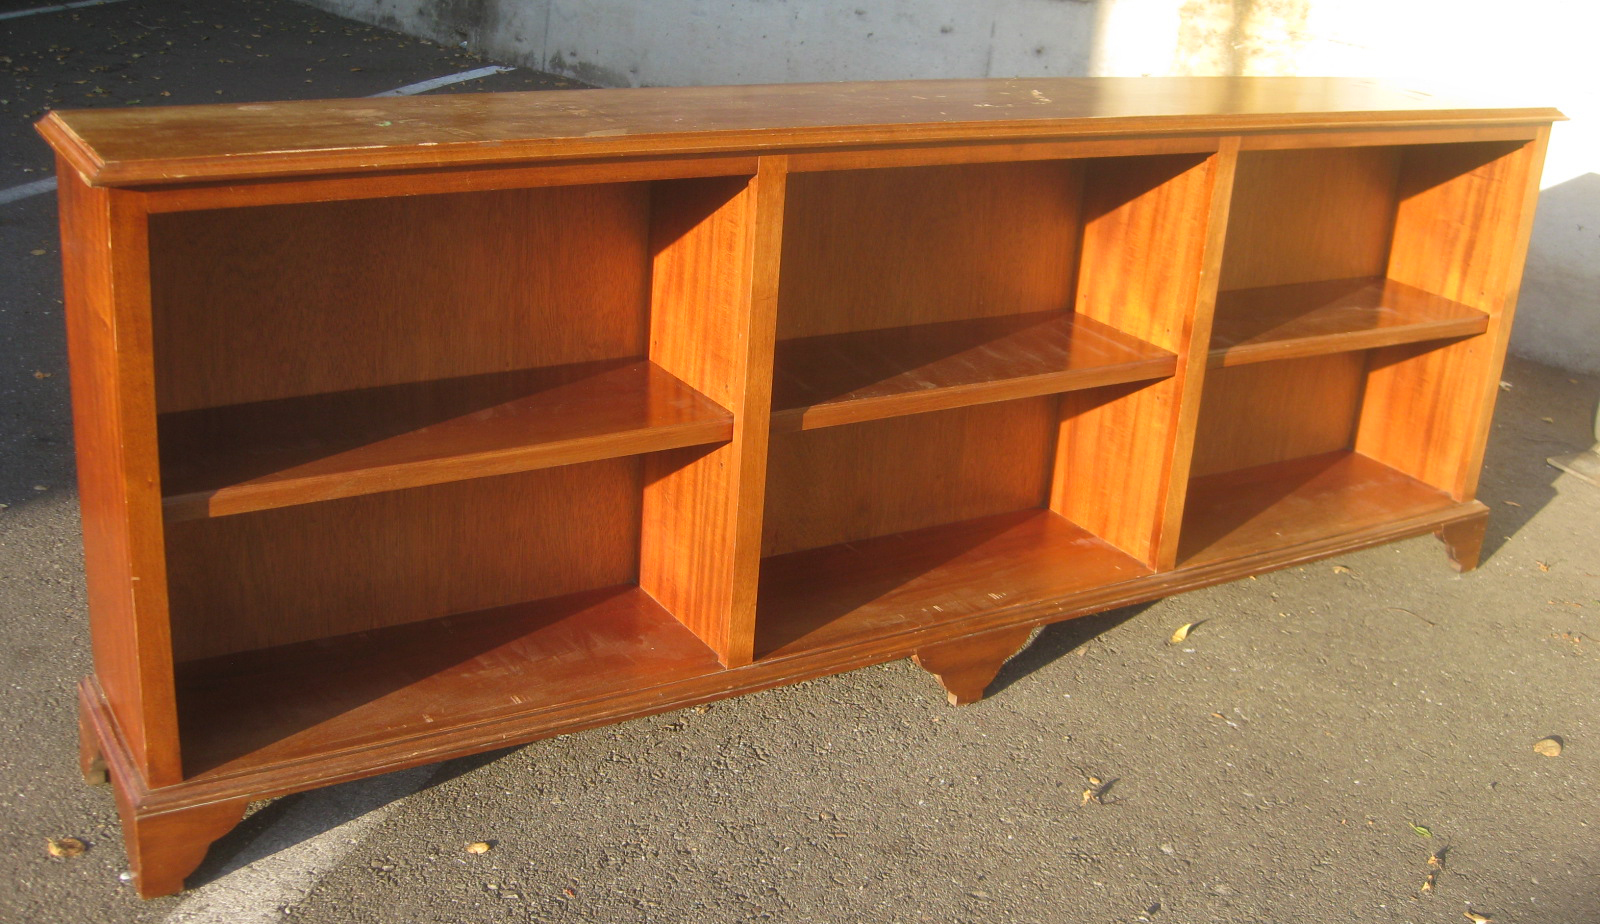 UHURU FURNITURE &amp; COLLECTIBLES: SOLD - Long Low Wooden ...